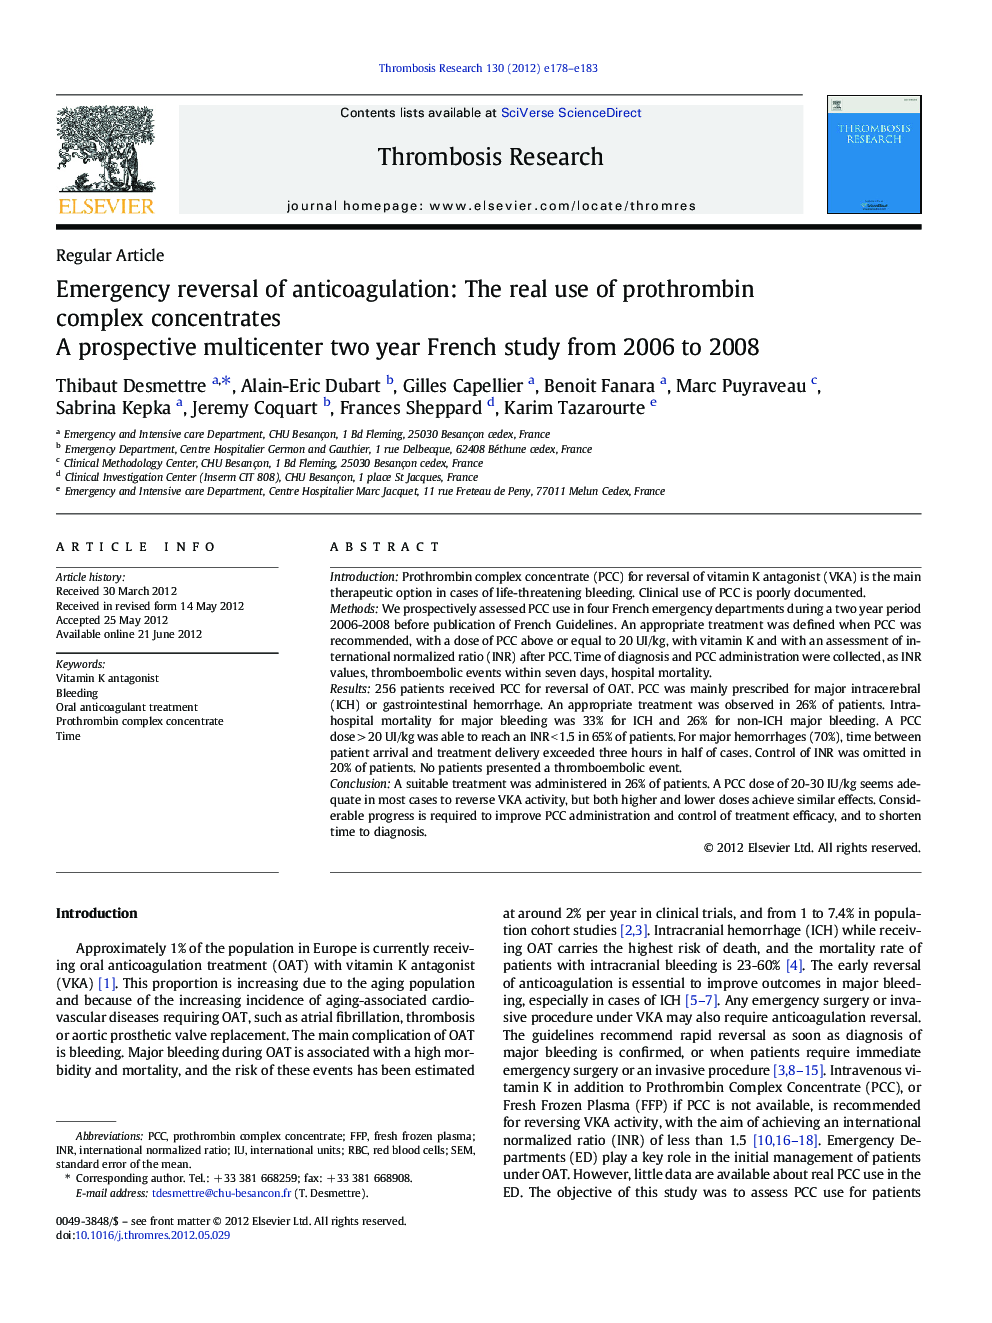 Emergency reversal of anticoagulation: The real use of prothrombin complex concentrates: A prospective multicenter two year French study from 2006 to 2008